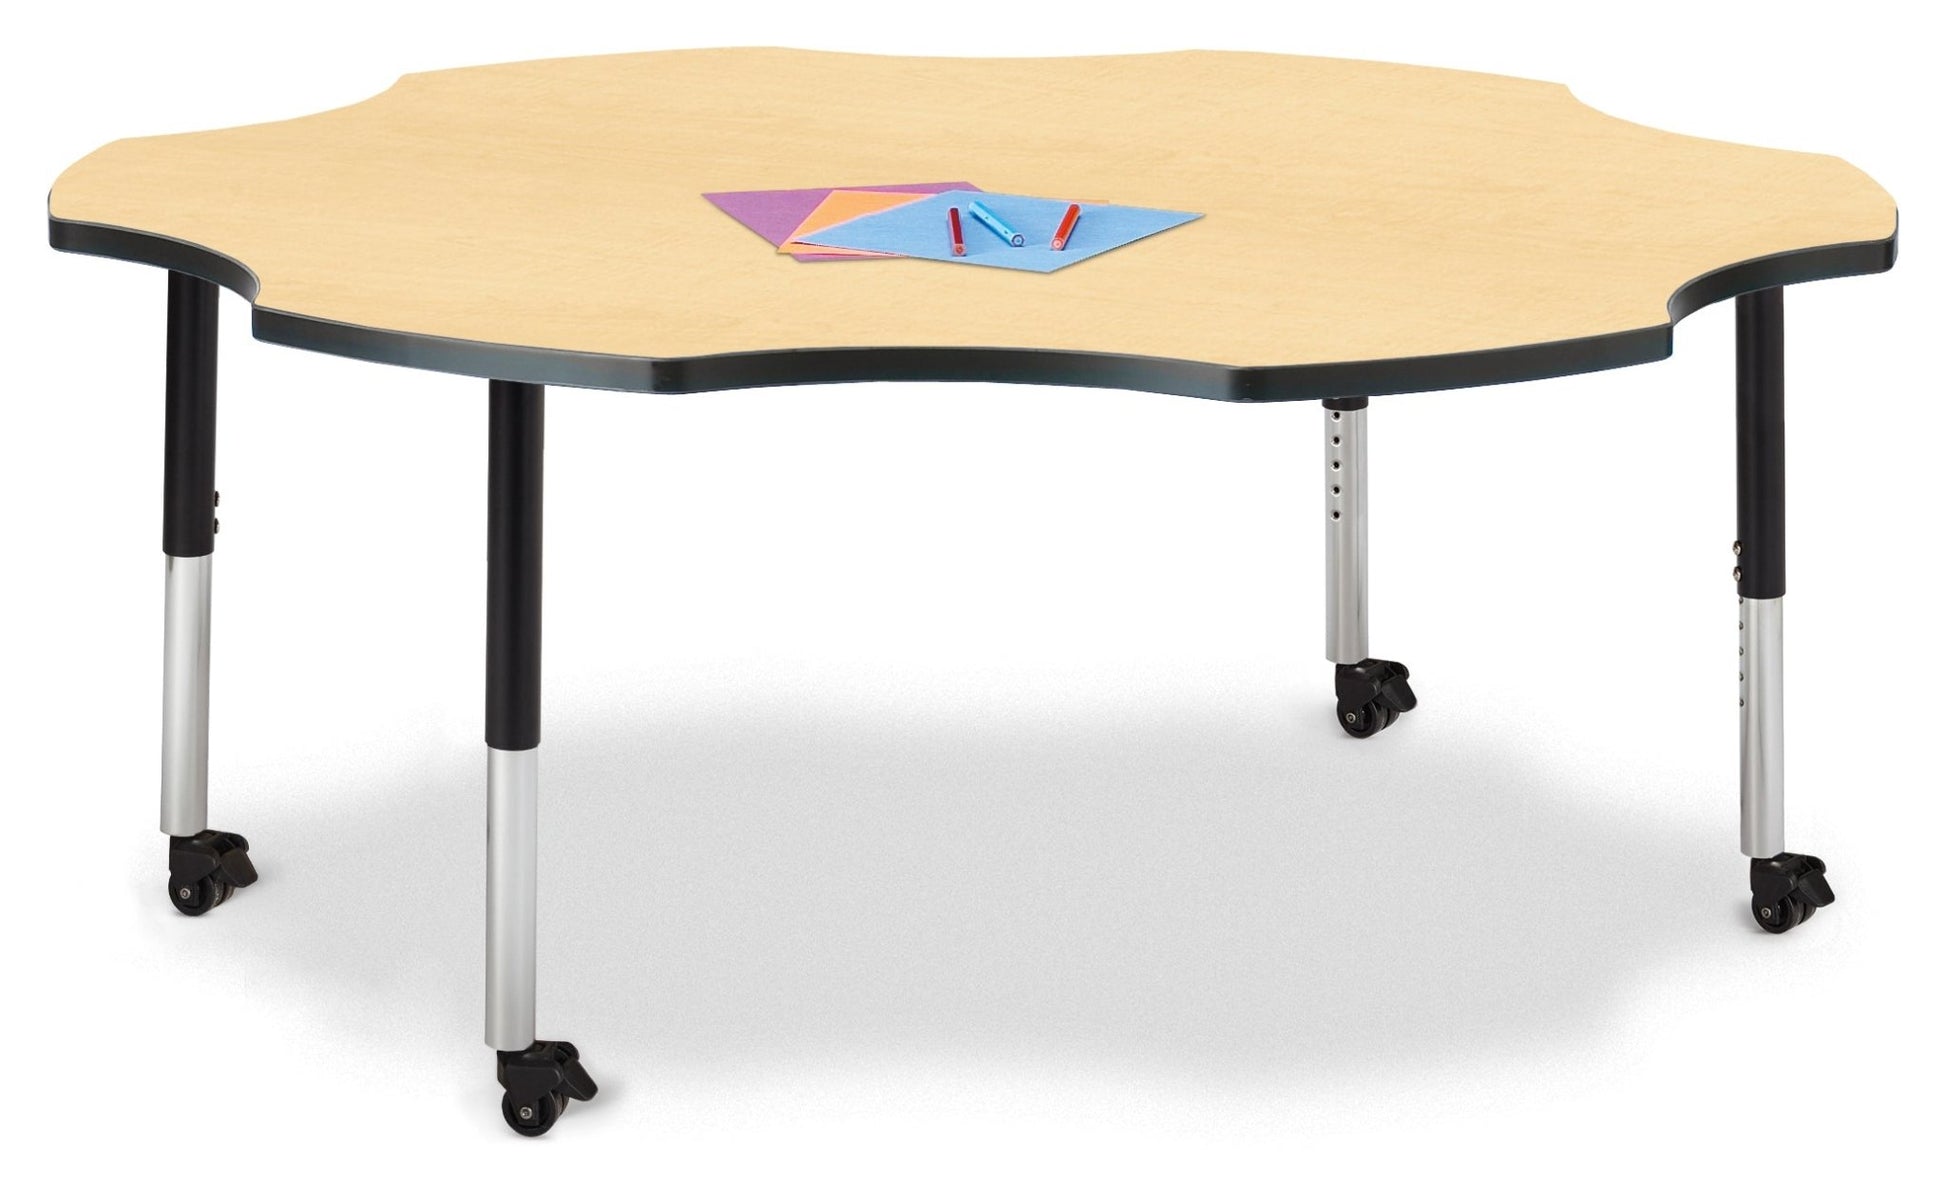 Jonti-Craft Six-Leaf Activity Table with Heavy Duty Laminate Top - Mobile Height Adjustable Legs - SchoolOutlet